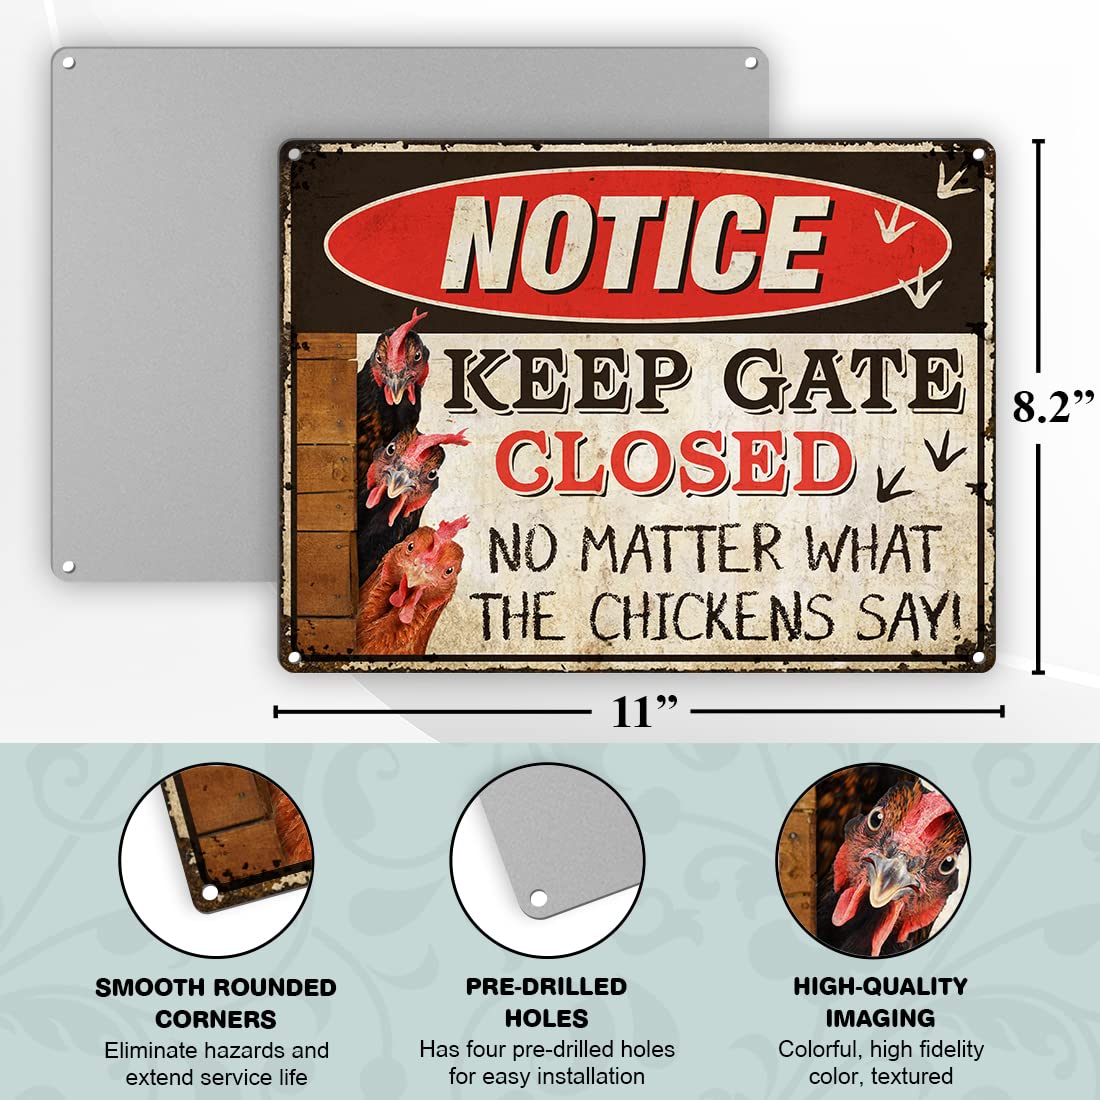 Warning Chicken Signs For Coop Funny Outdoor - Keep Gate Closed No Matter What The Chickens Say Aluminum Rust Free 9" X 11", Pre-Drilled Holes, Weather Resistant